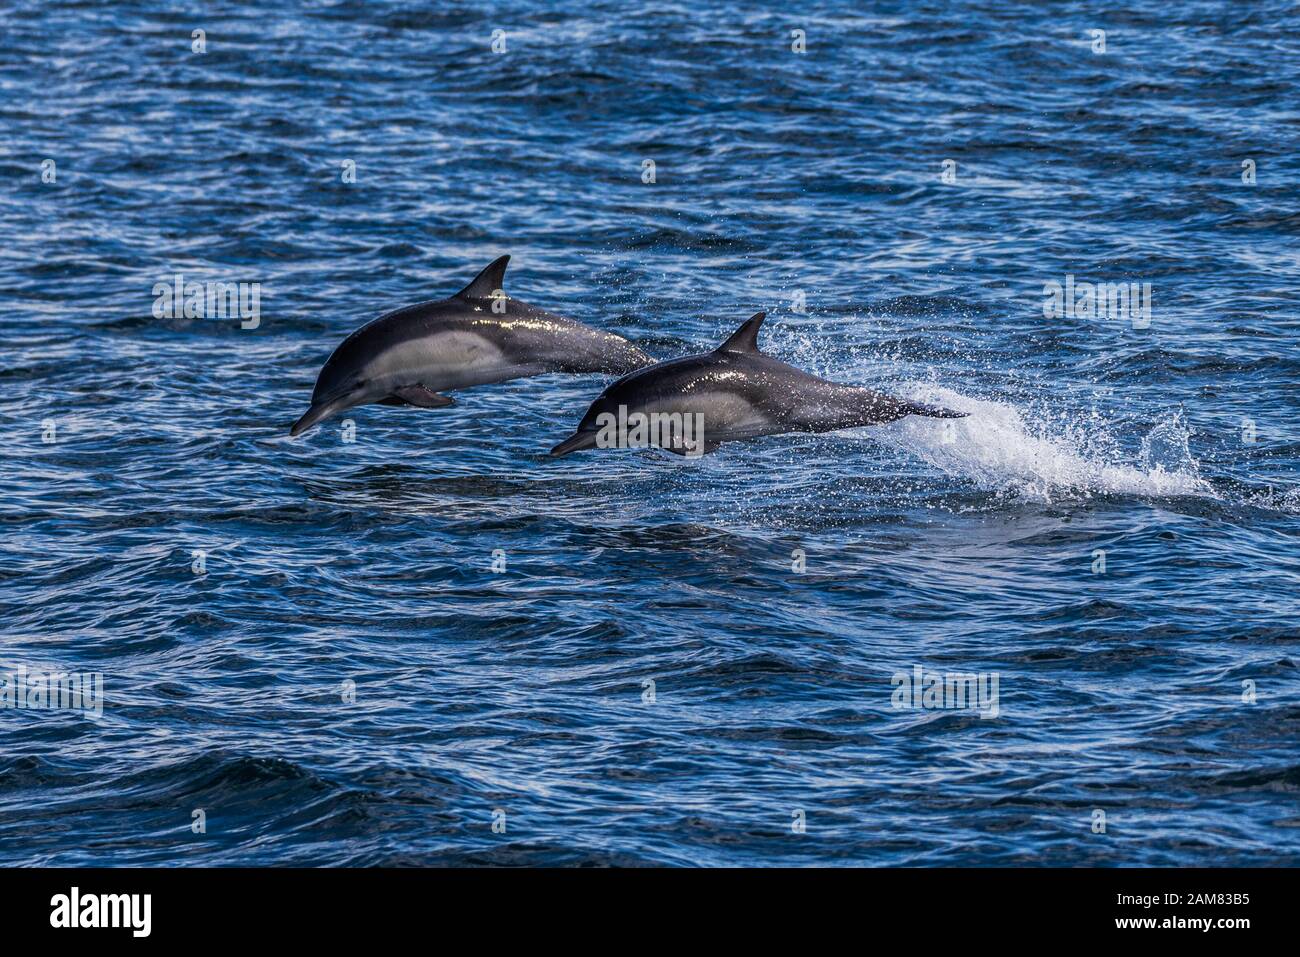 California common dolphins making splashes of ocean water while breaching the surface and jump out of the water. Stock Photo